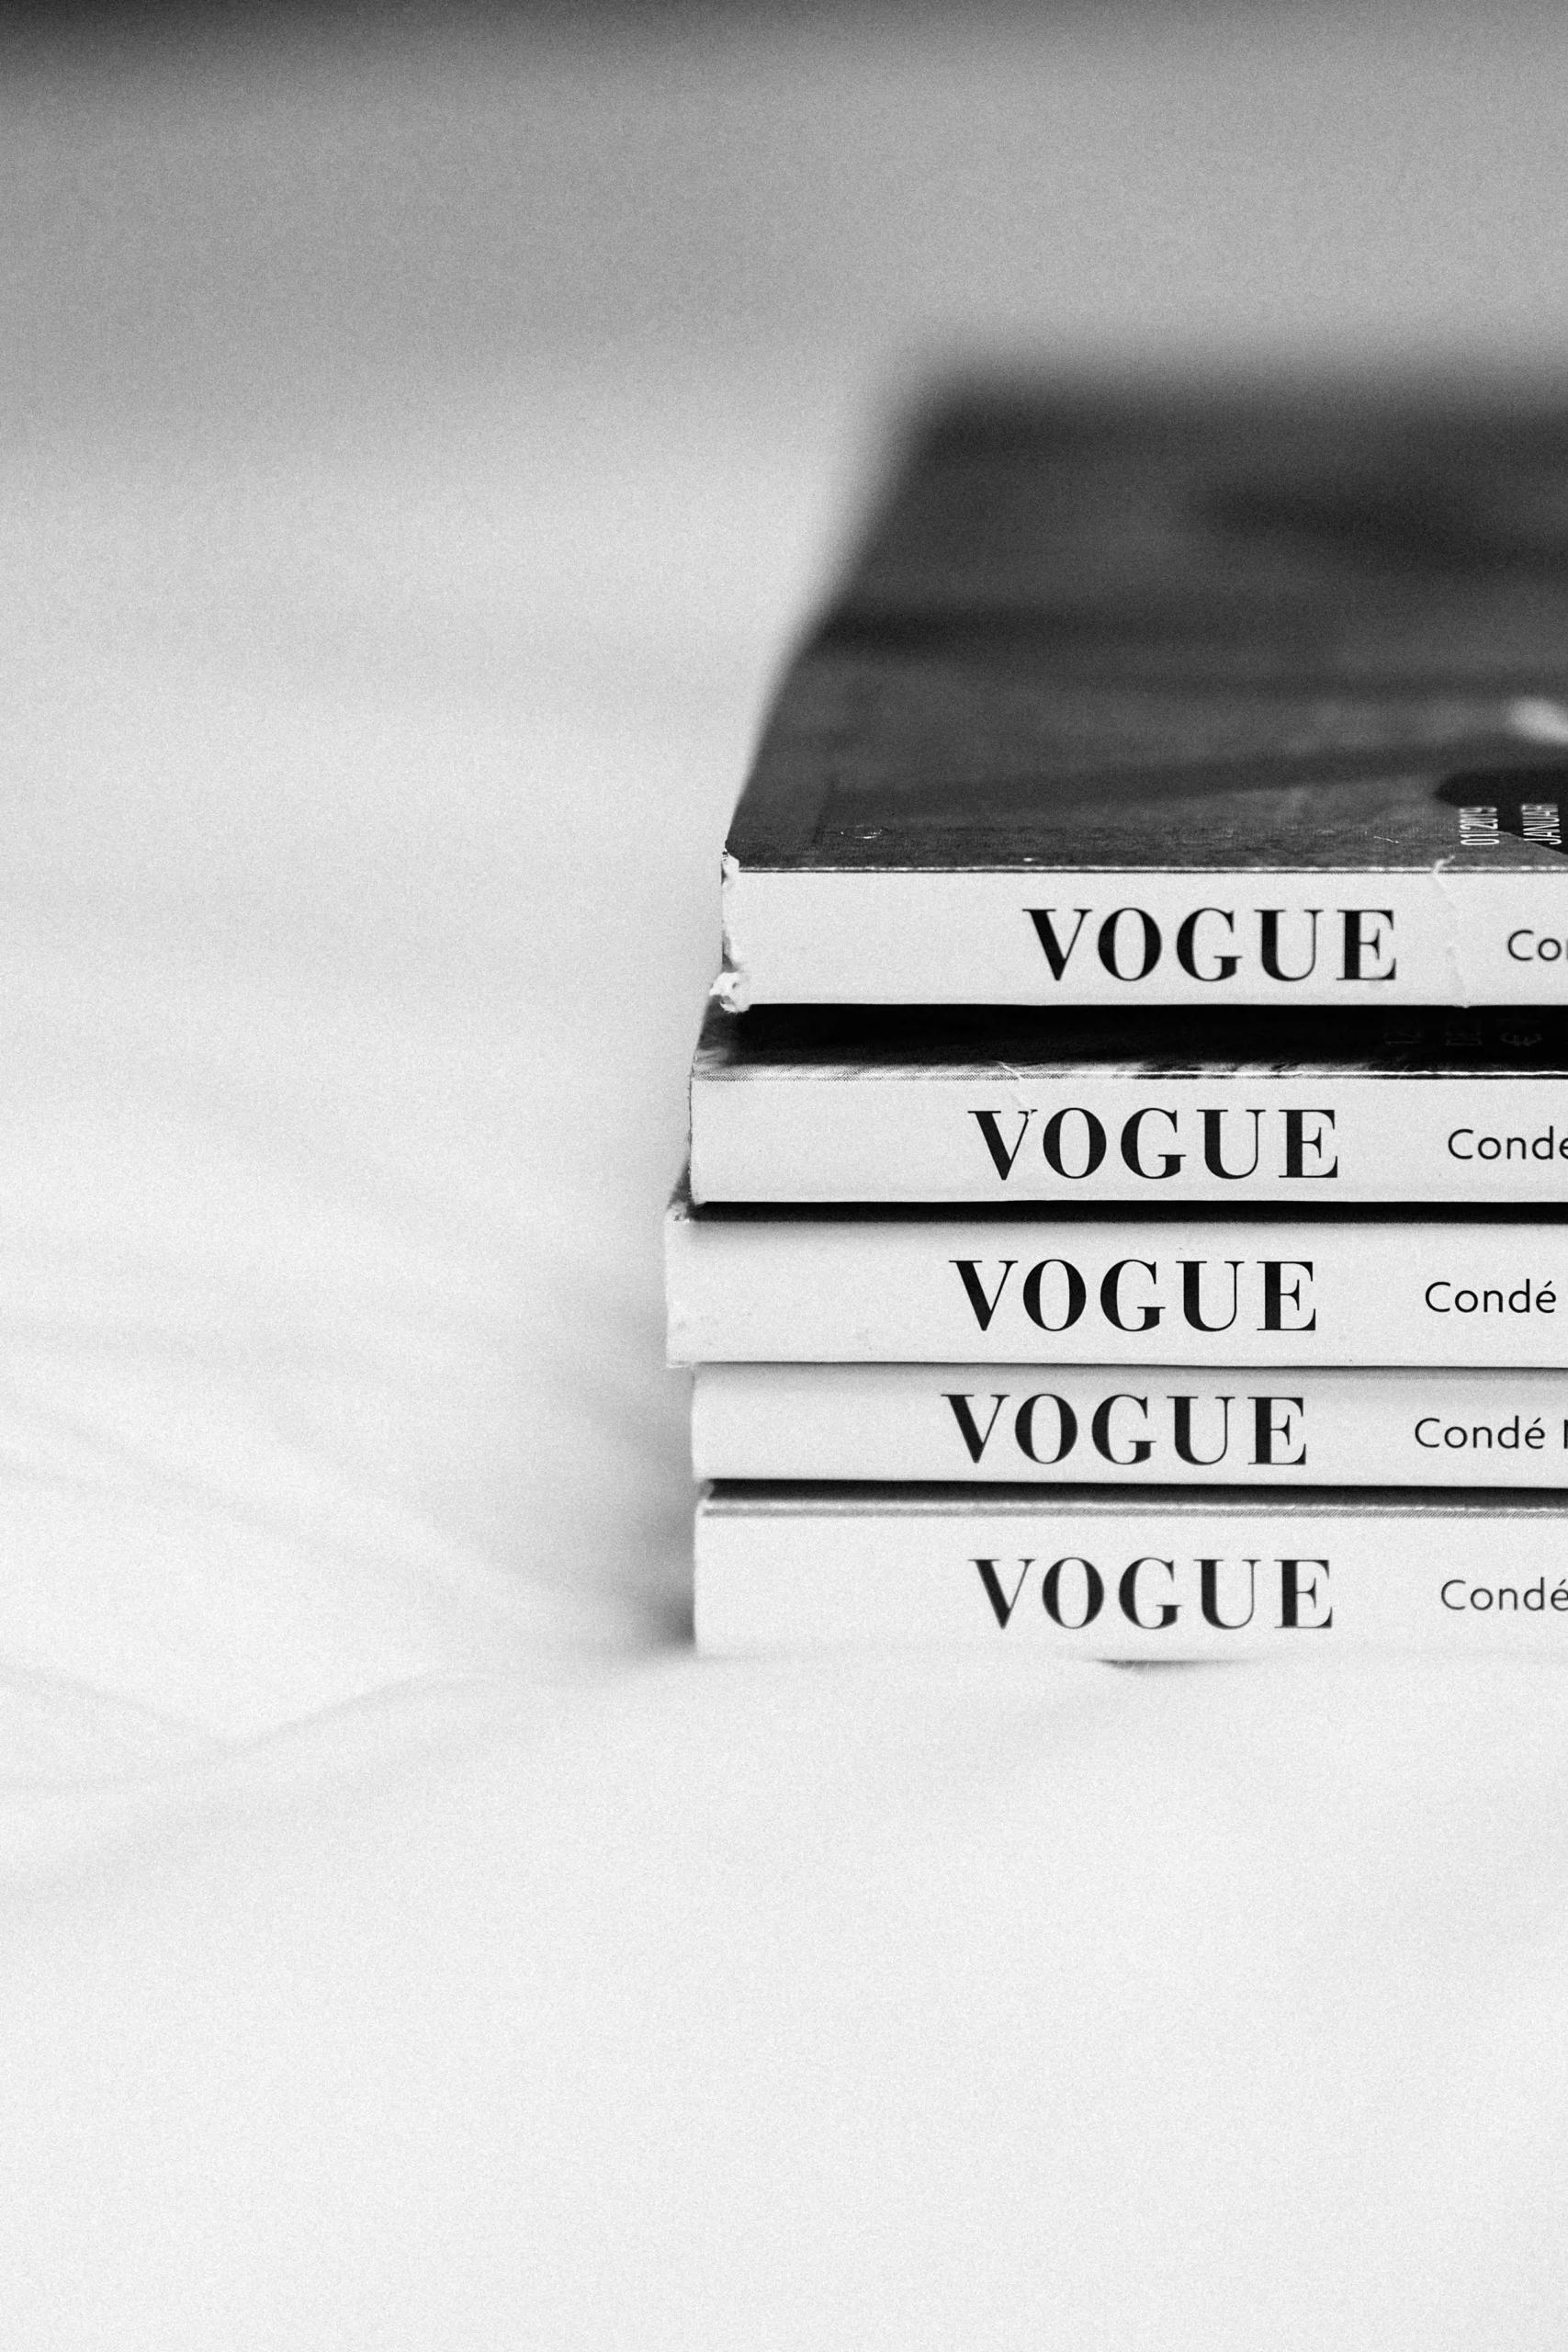 A stack of Vogue magazines